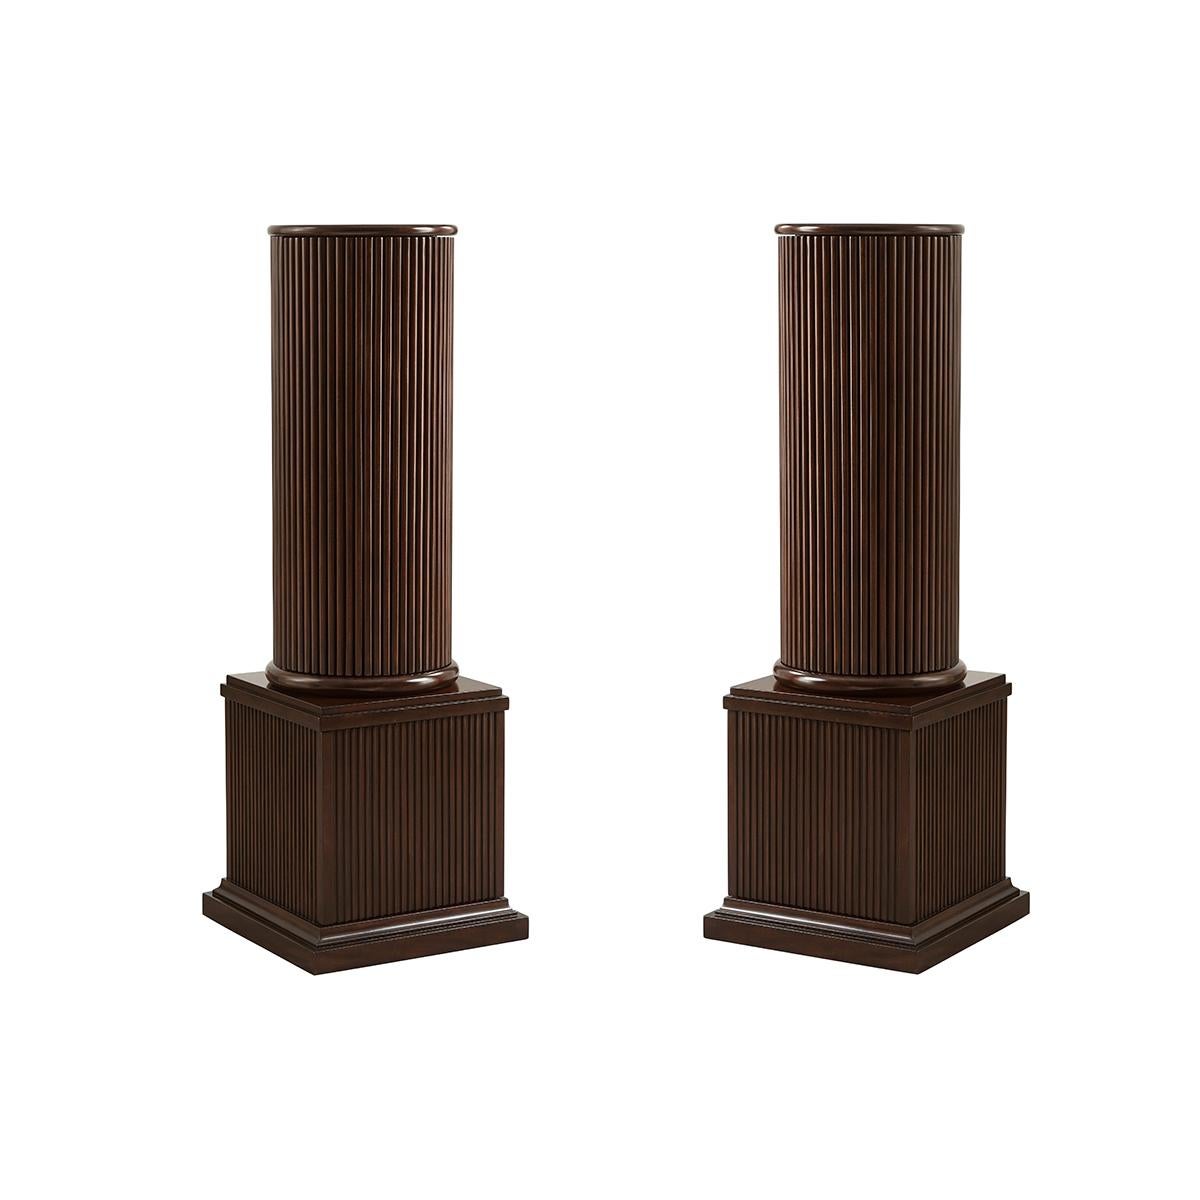 Pair of Neoclassic Column Form Pedestals For Sale